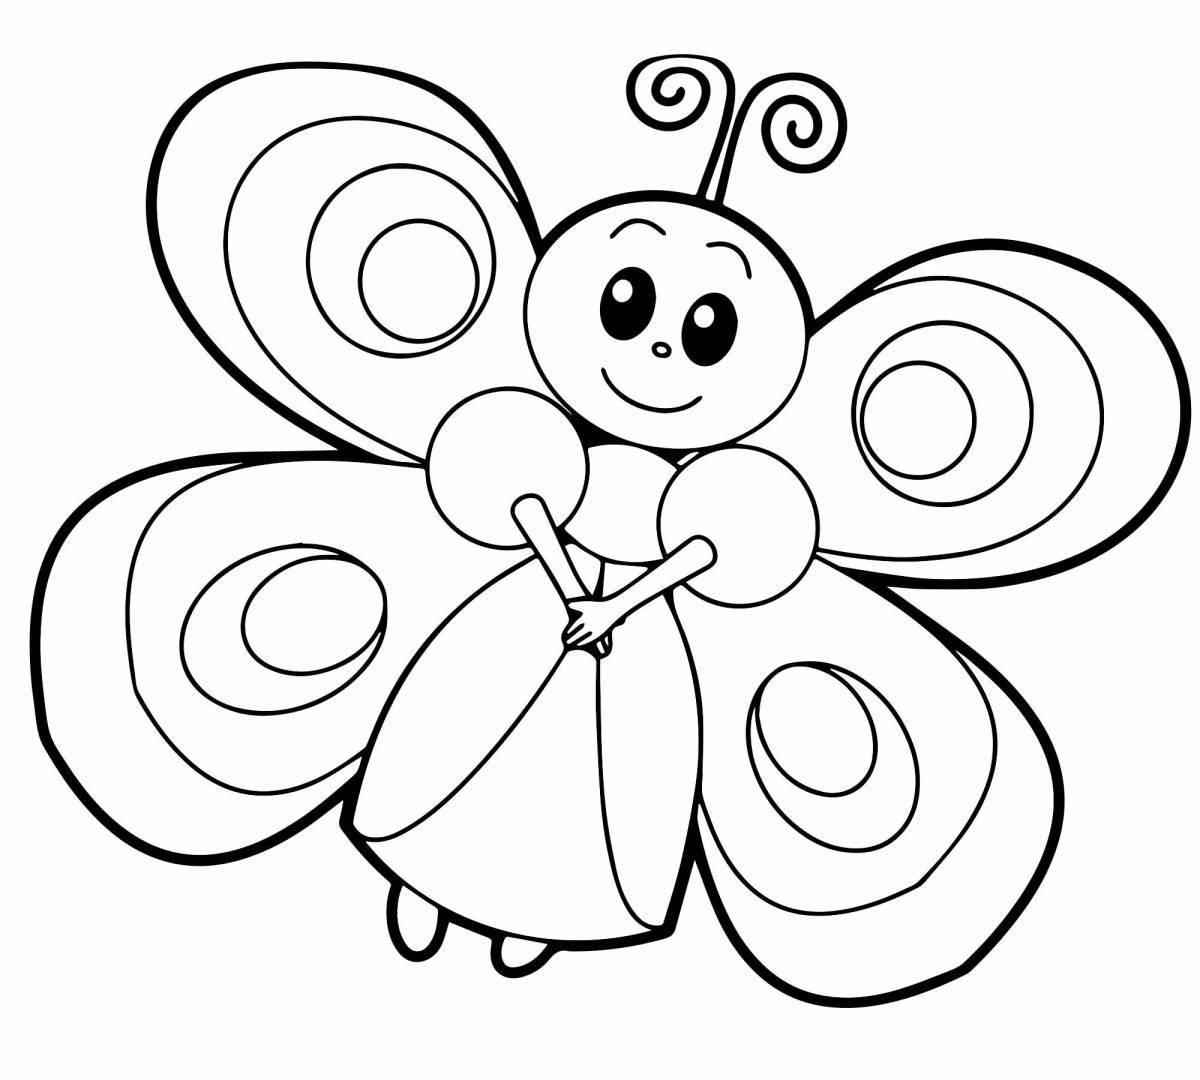 Glorious butterfly coloring book for 4-5 year olds